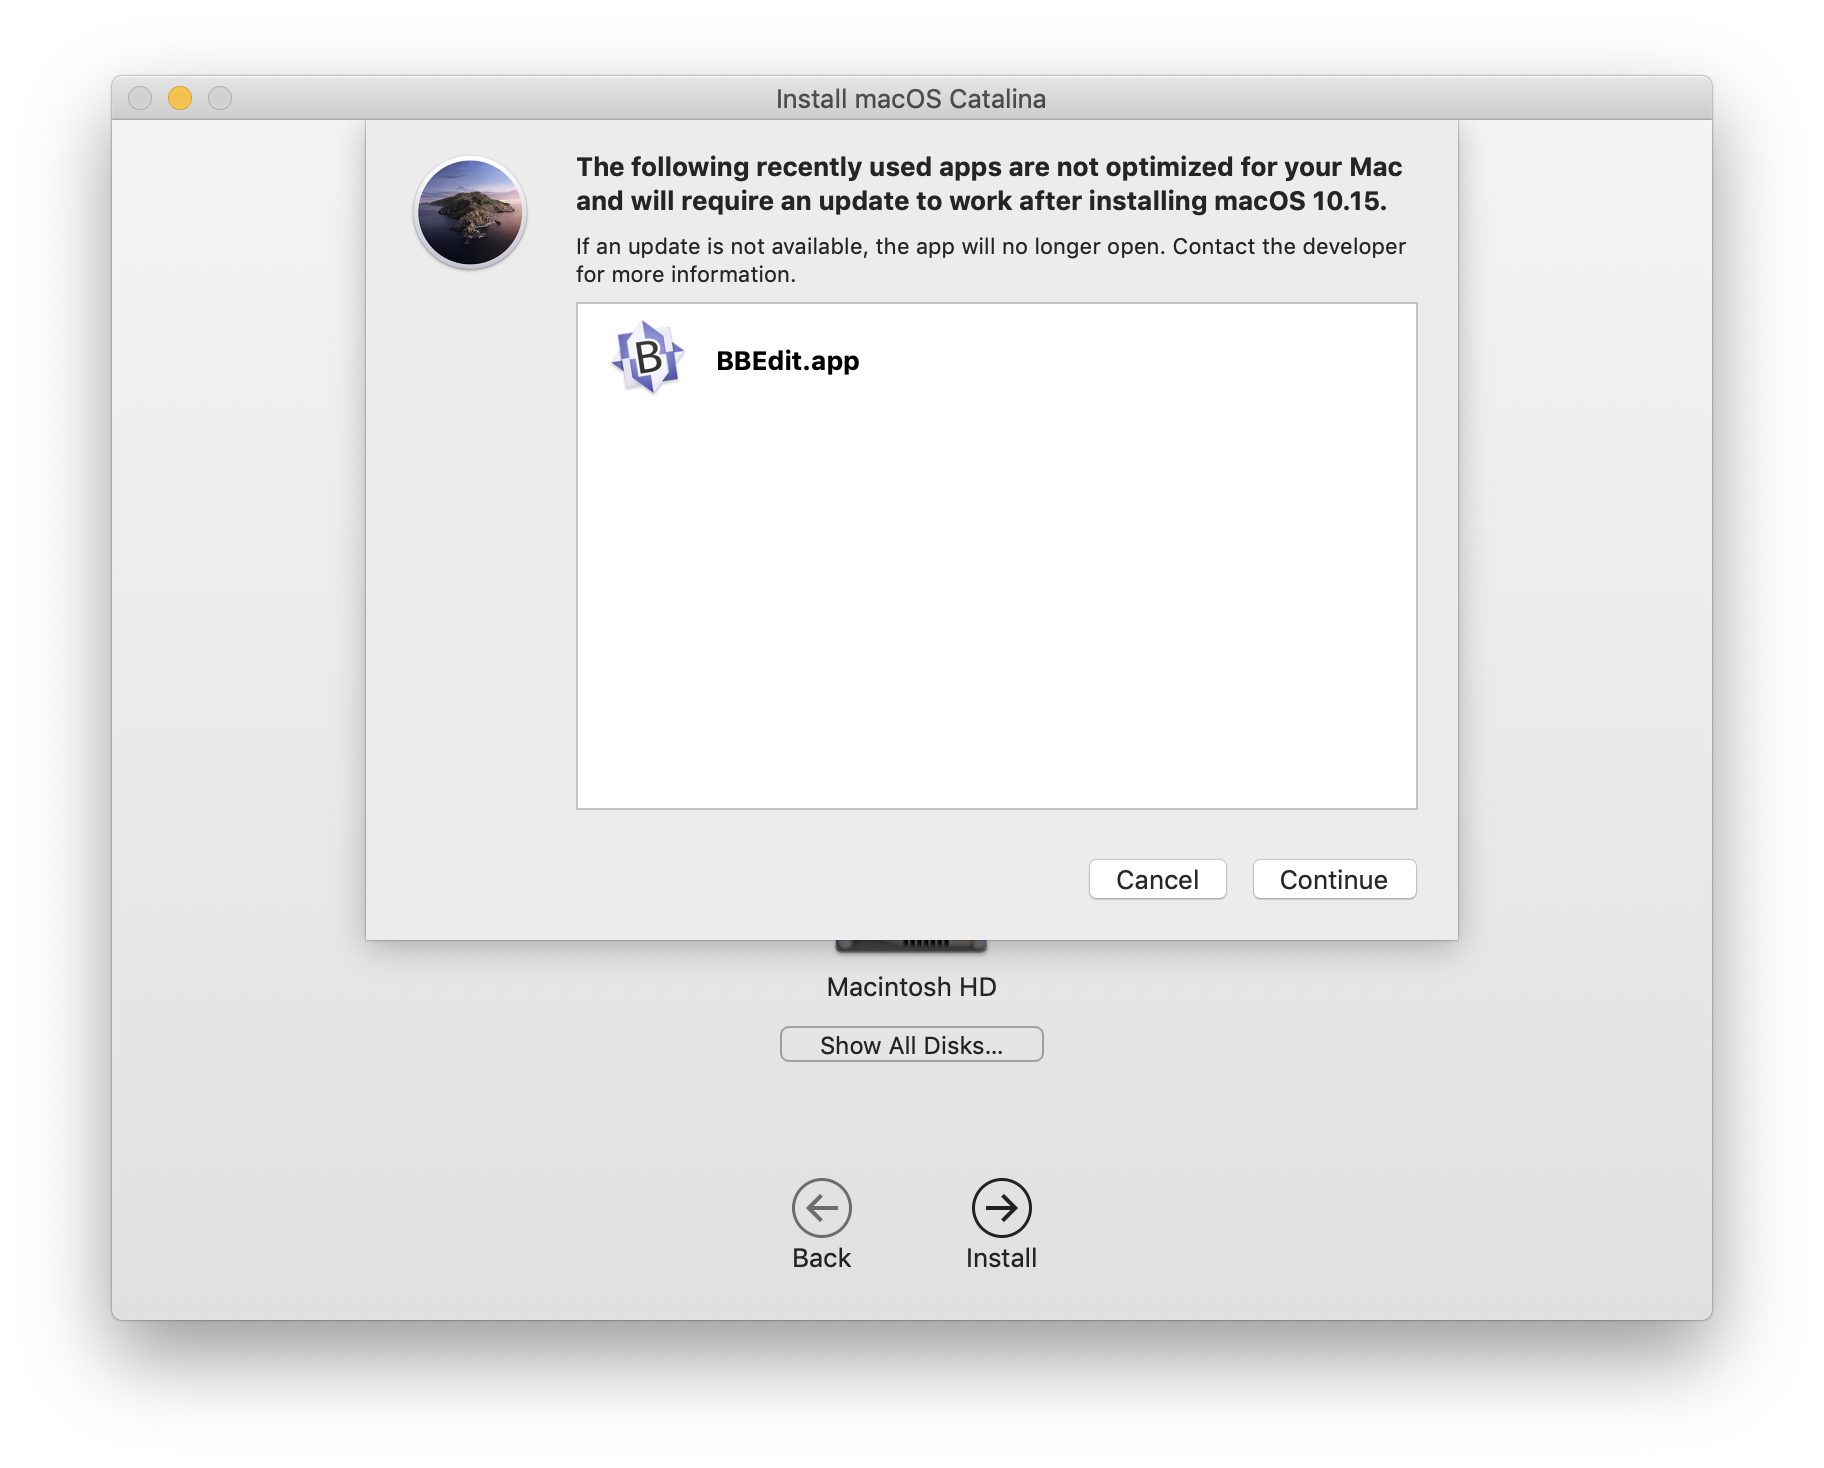 update app installed for different user mac